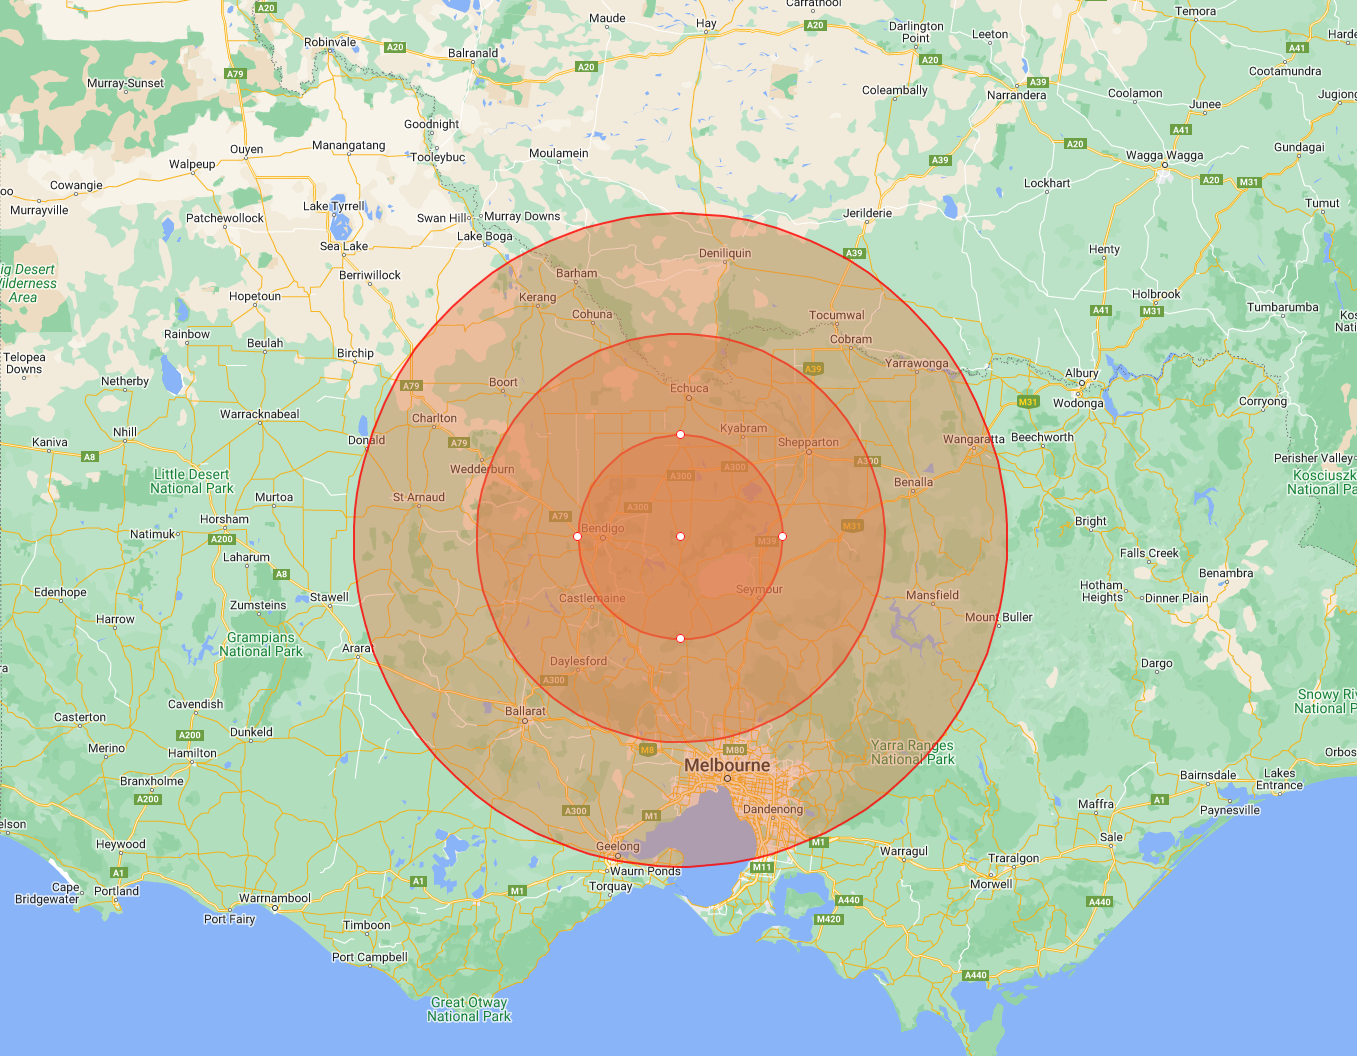 Map of Victoria, Australia, overlaid with concentric circles denoting radii of 50, 100 and 150km from the epicentre of Apulia Grove.